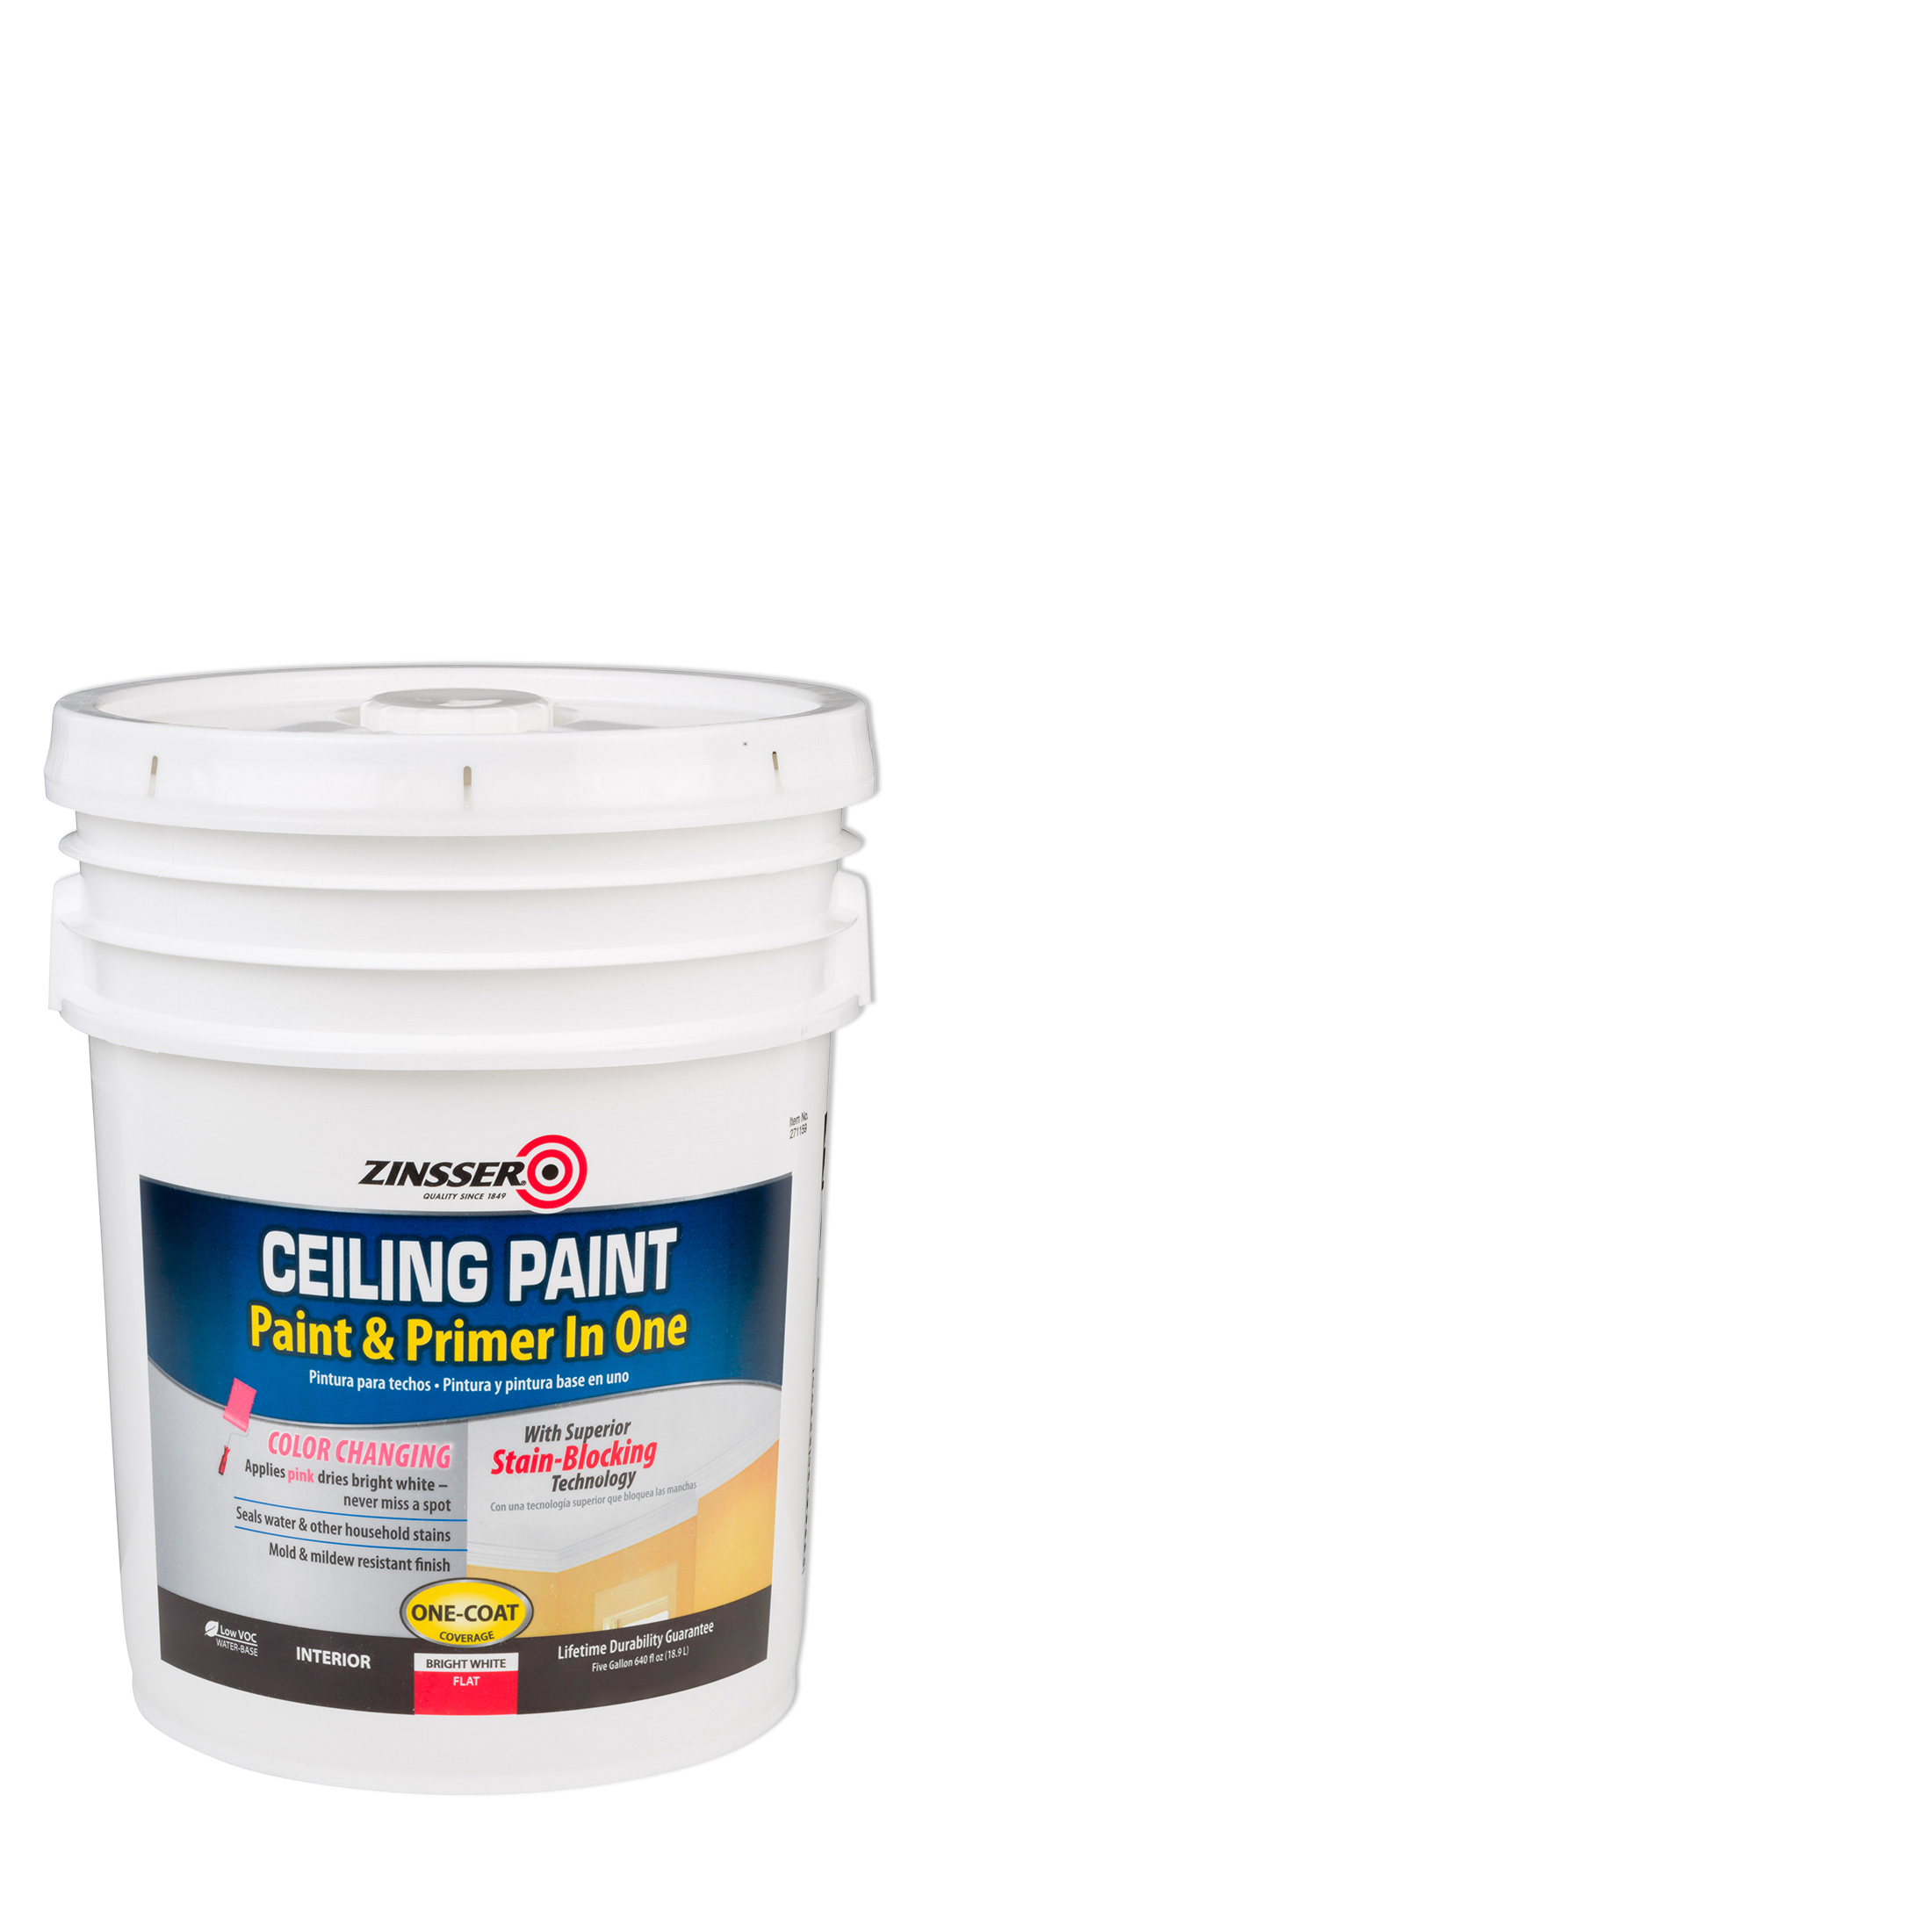 White, Zinsser Flat Ceiling Paint and Primer- 5 Gallon, 1 Per Pack - image 1 of 5